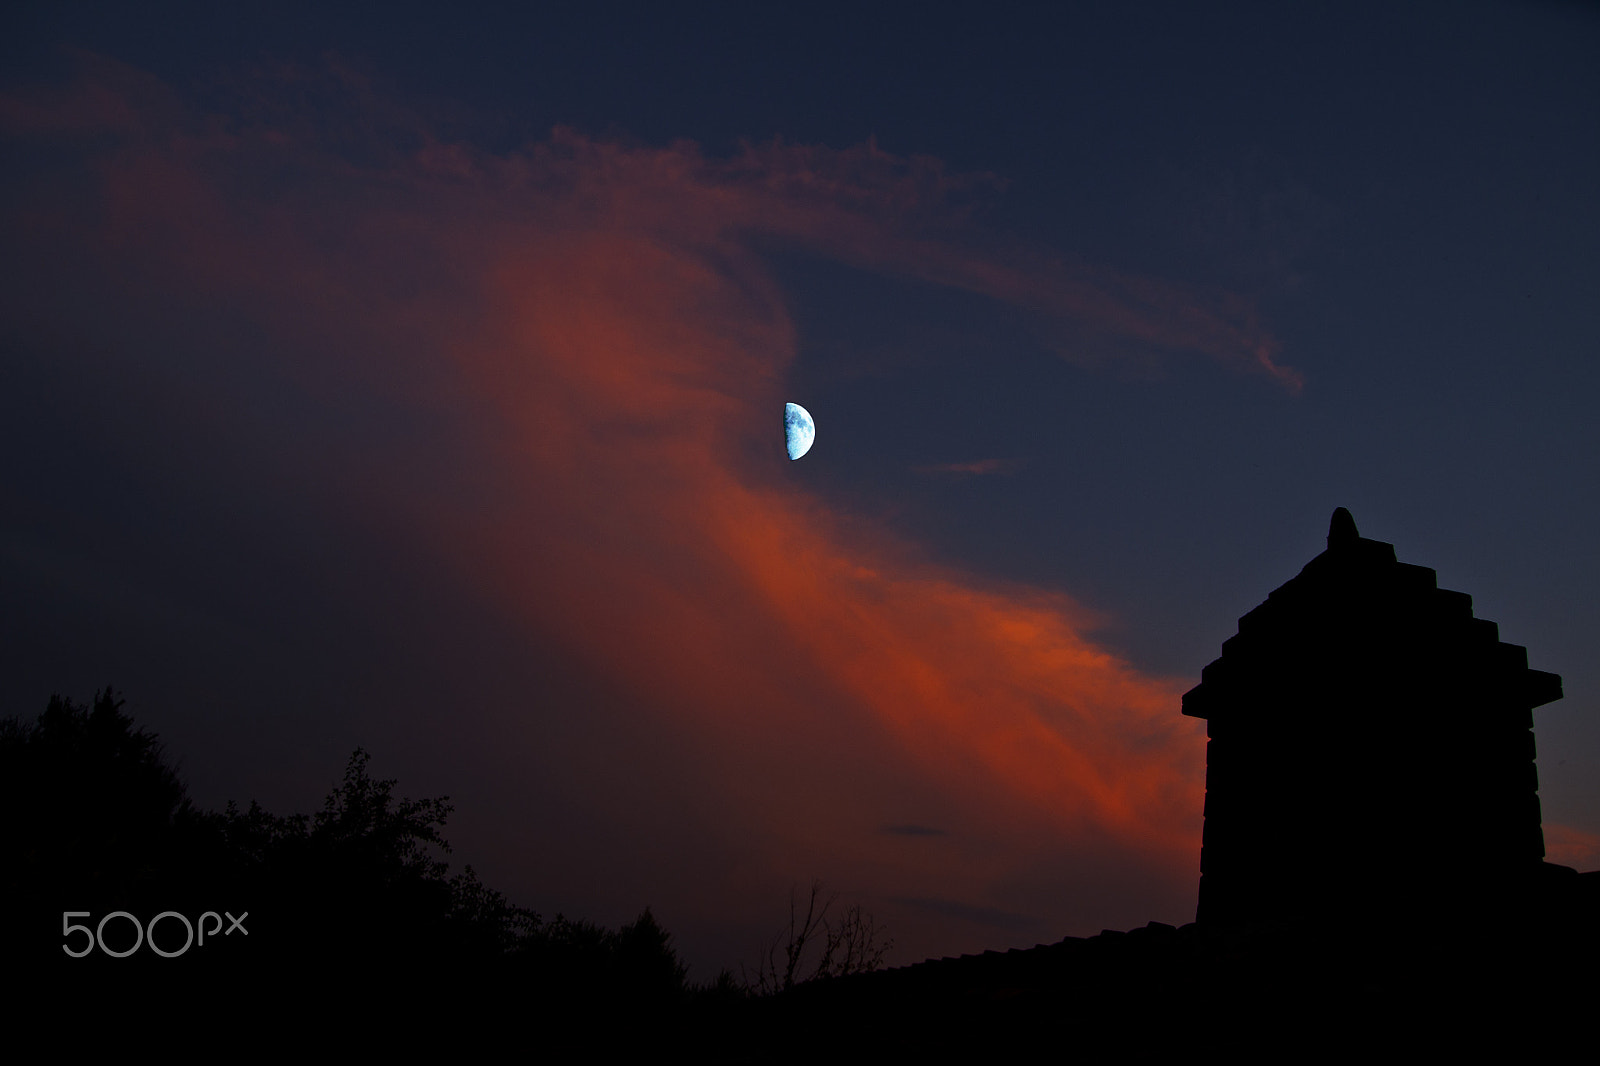 Sony Alpha DSLR-A700 + Tamron SP AF 17-50mm F2.8 XR Di II LD Aspherical (IF) sample photo. Moon in the sunset photography